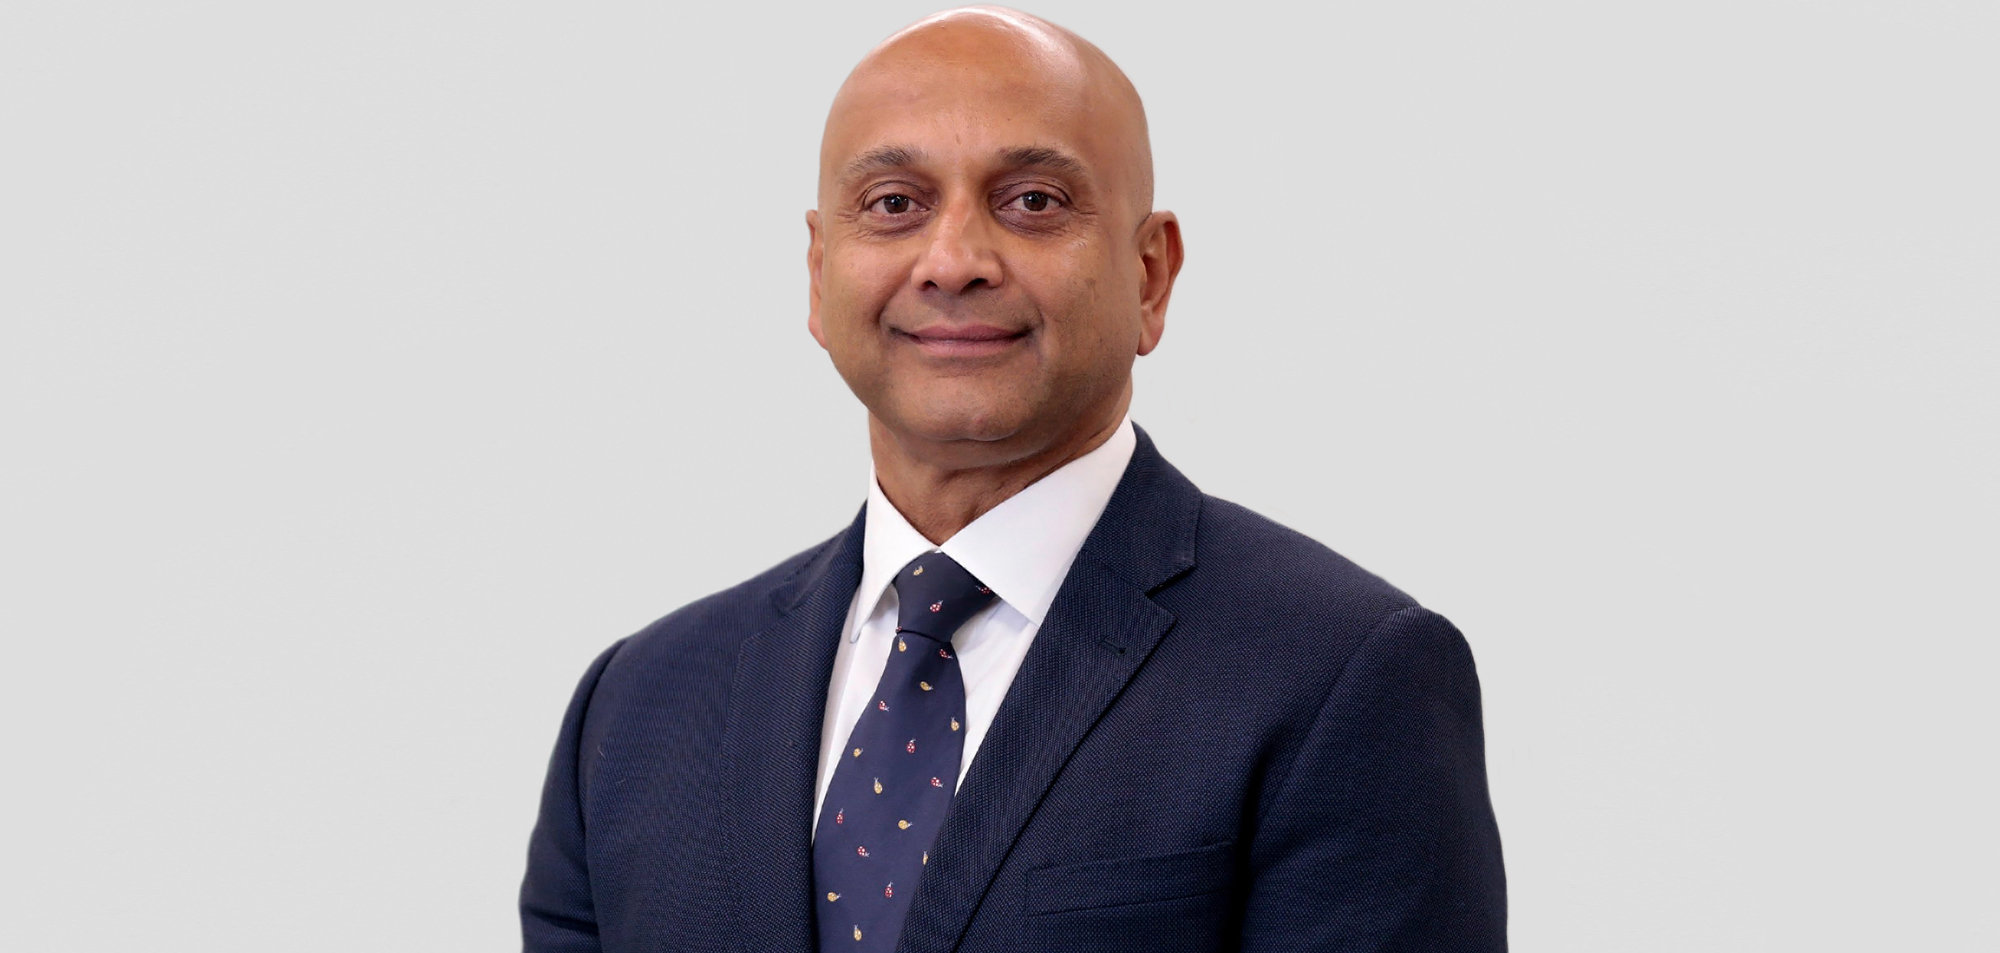 Kash Pandya joins the team | James Fisher and Sons plc